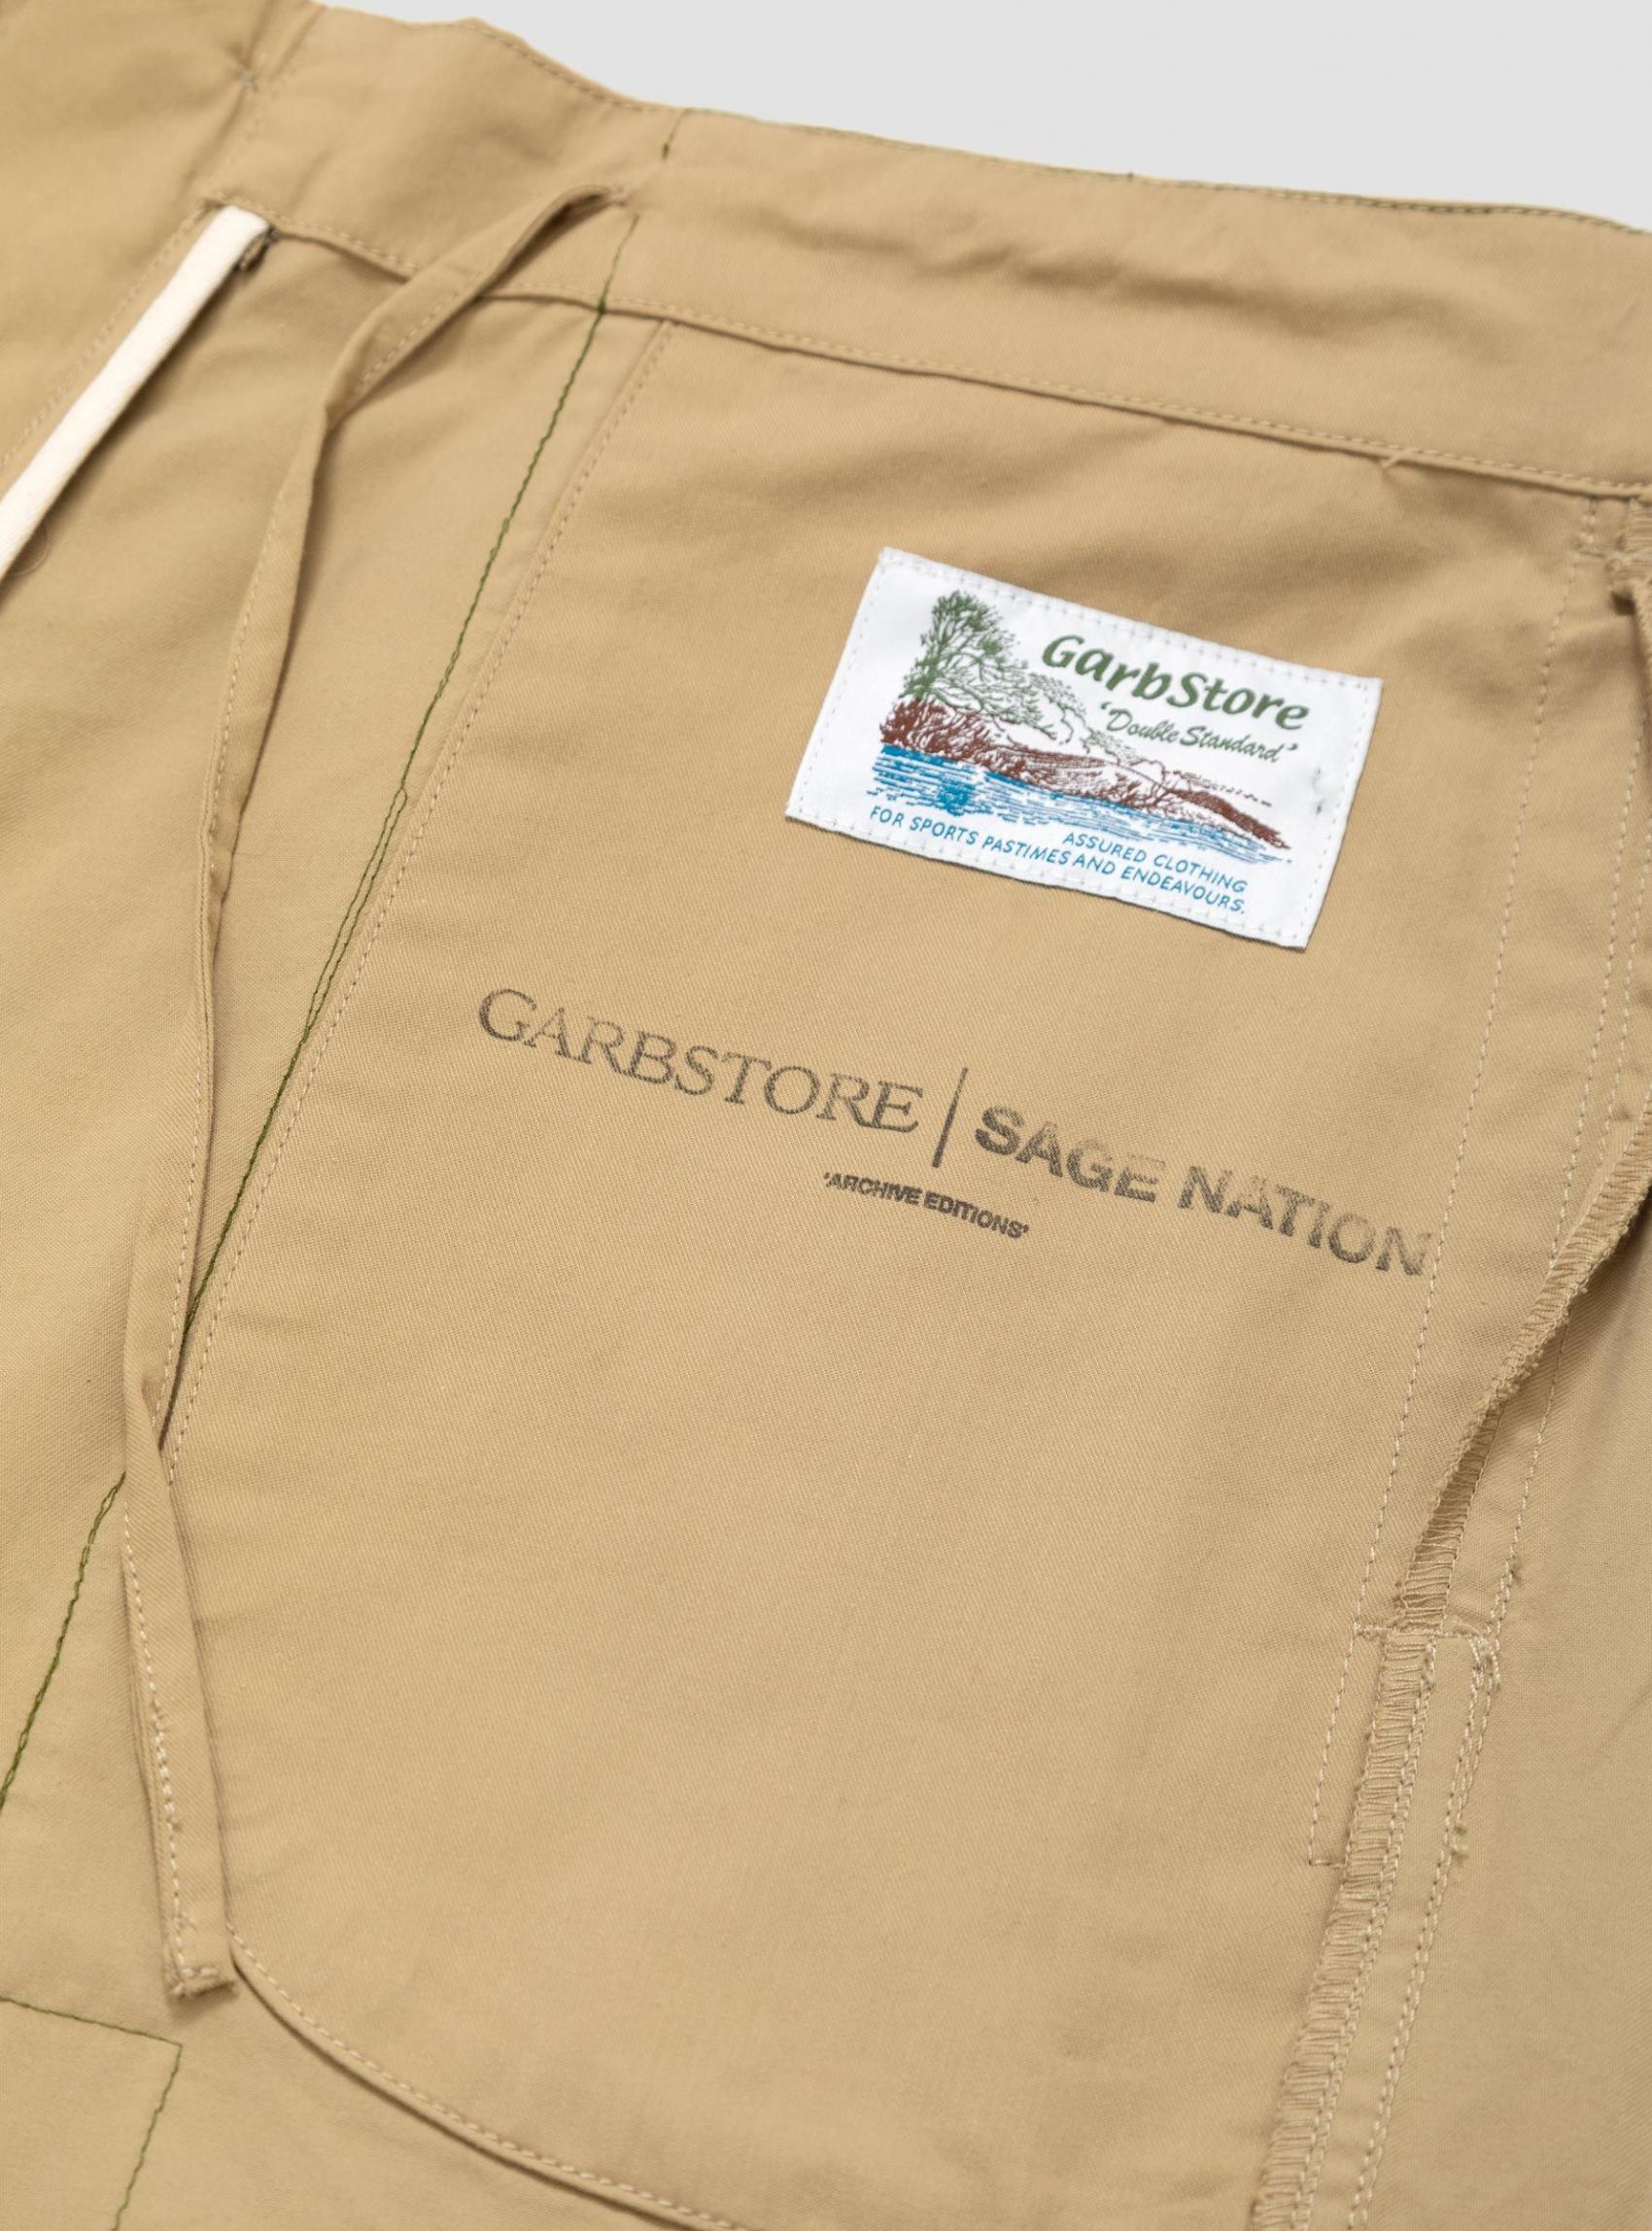 Shorts | Sage Nation X Garbstore Mens Archive Editions Work Easy Short Tan Tan